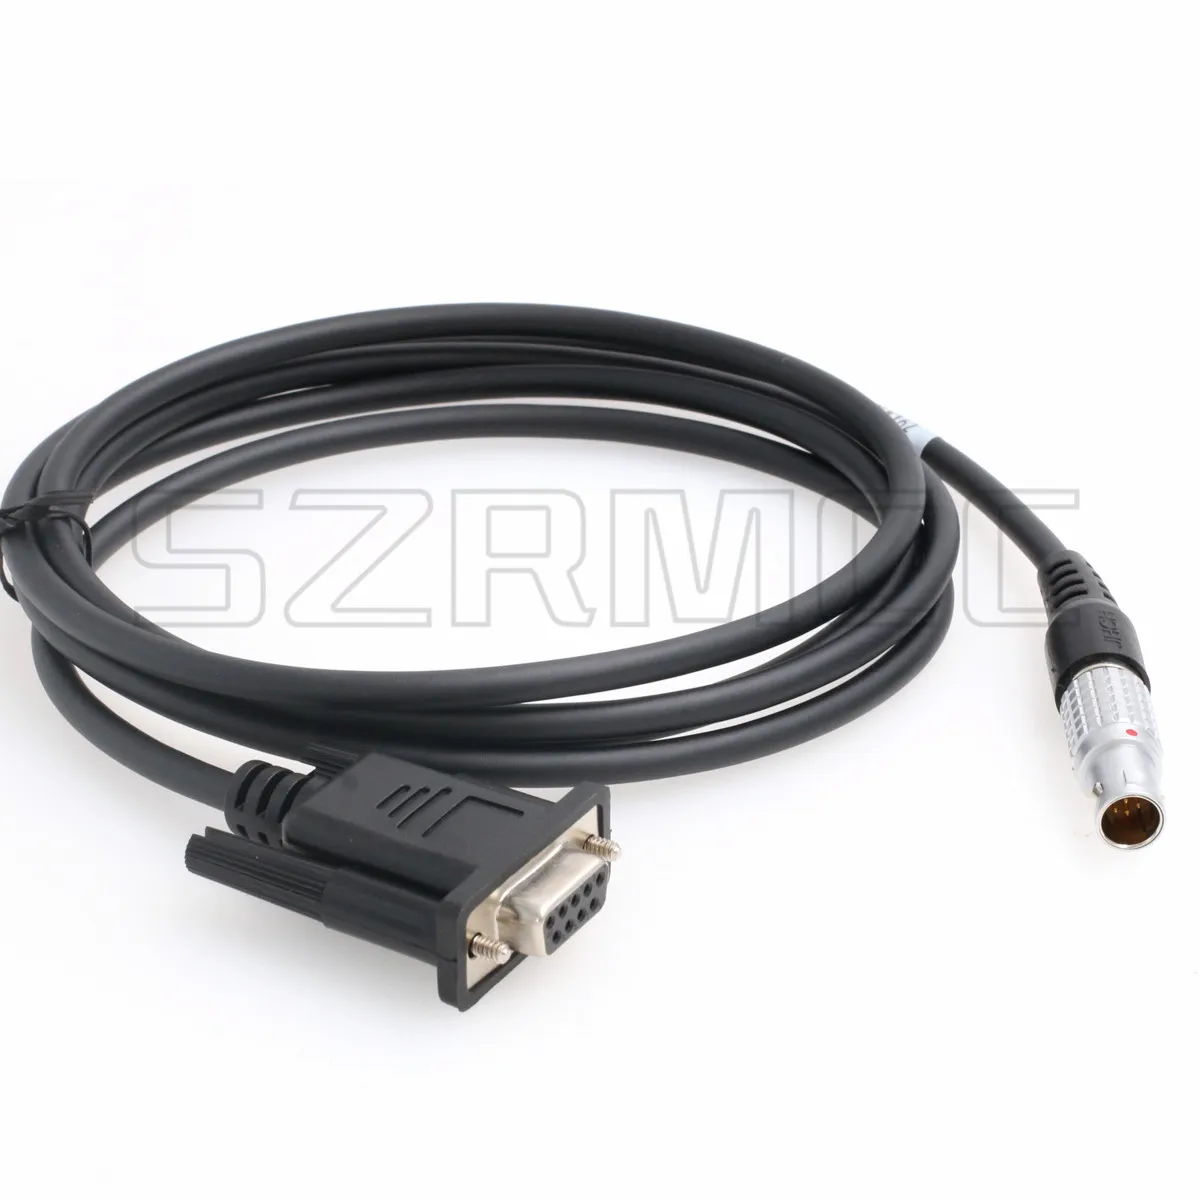 

GEV162 733282 GPS Data Transfer Cable for Leica TS30 TM30 TS50 Total Station RX1250 ATX1200 Controller Port to PC RS232 DB9